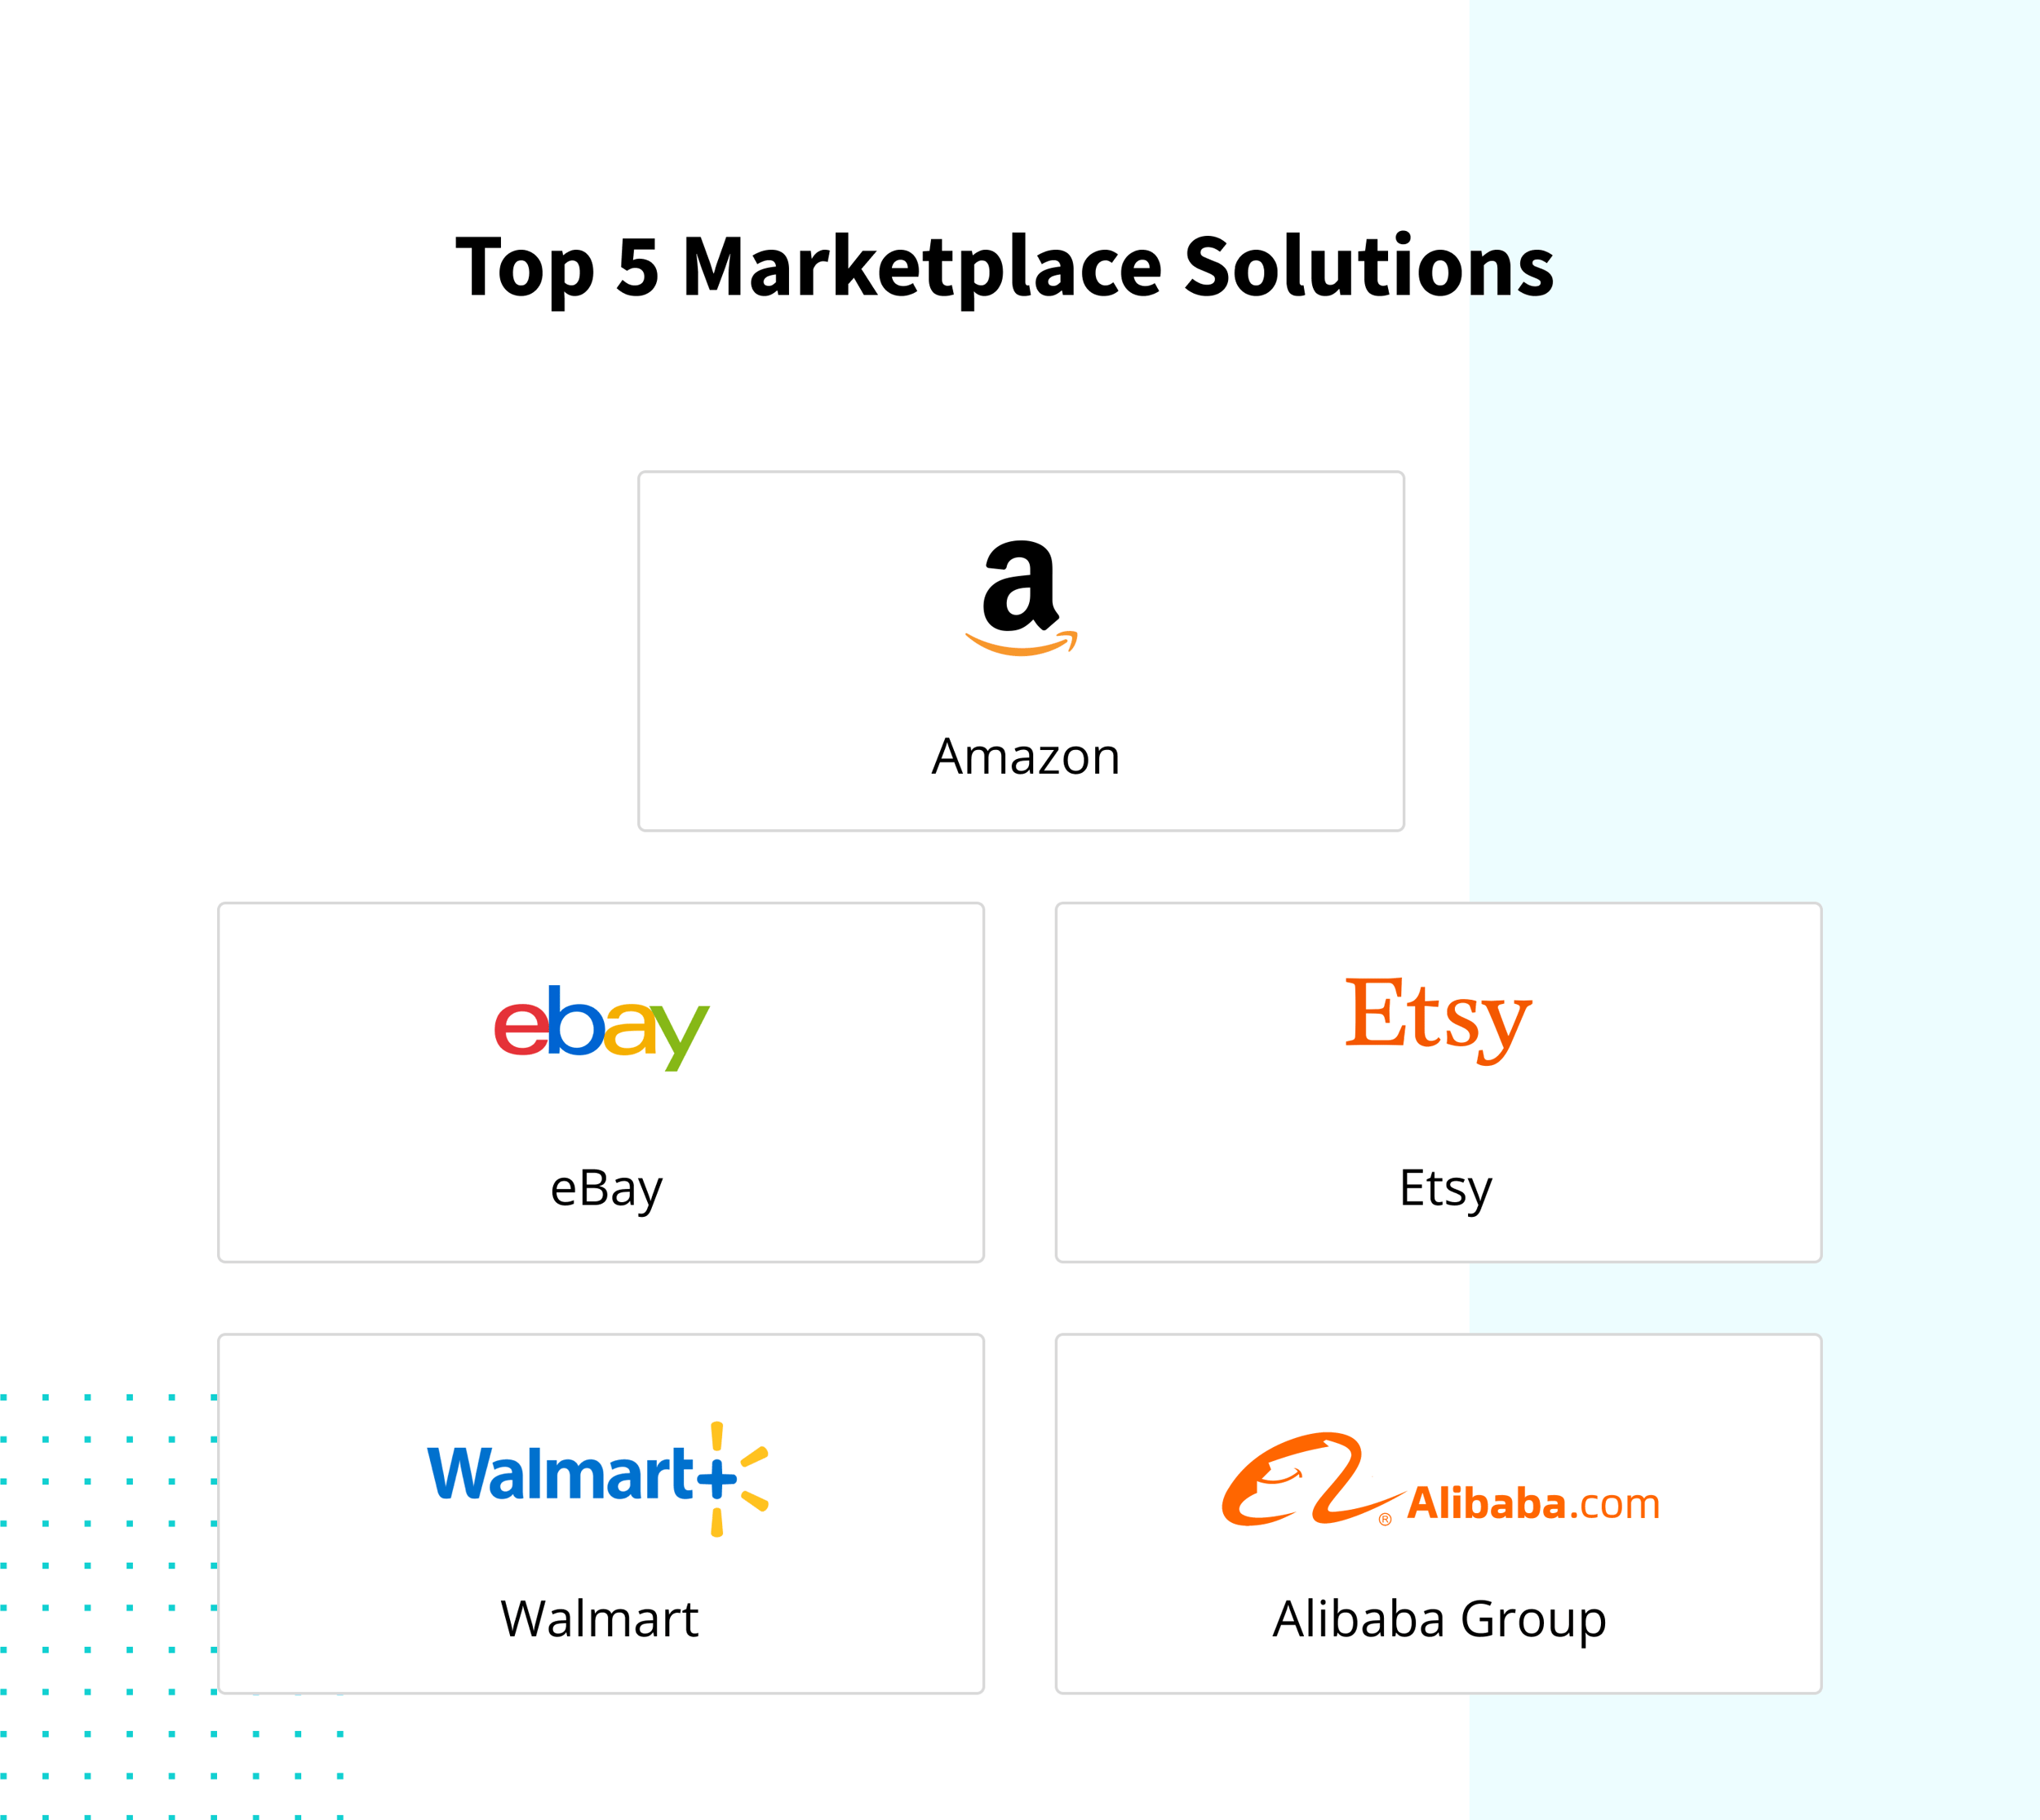 Top 5 marketplaces solutions